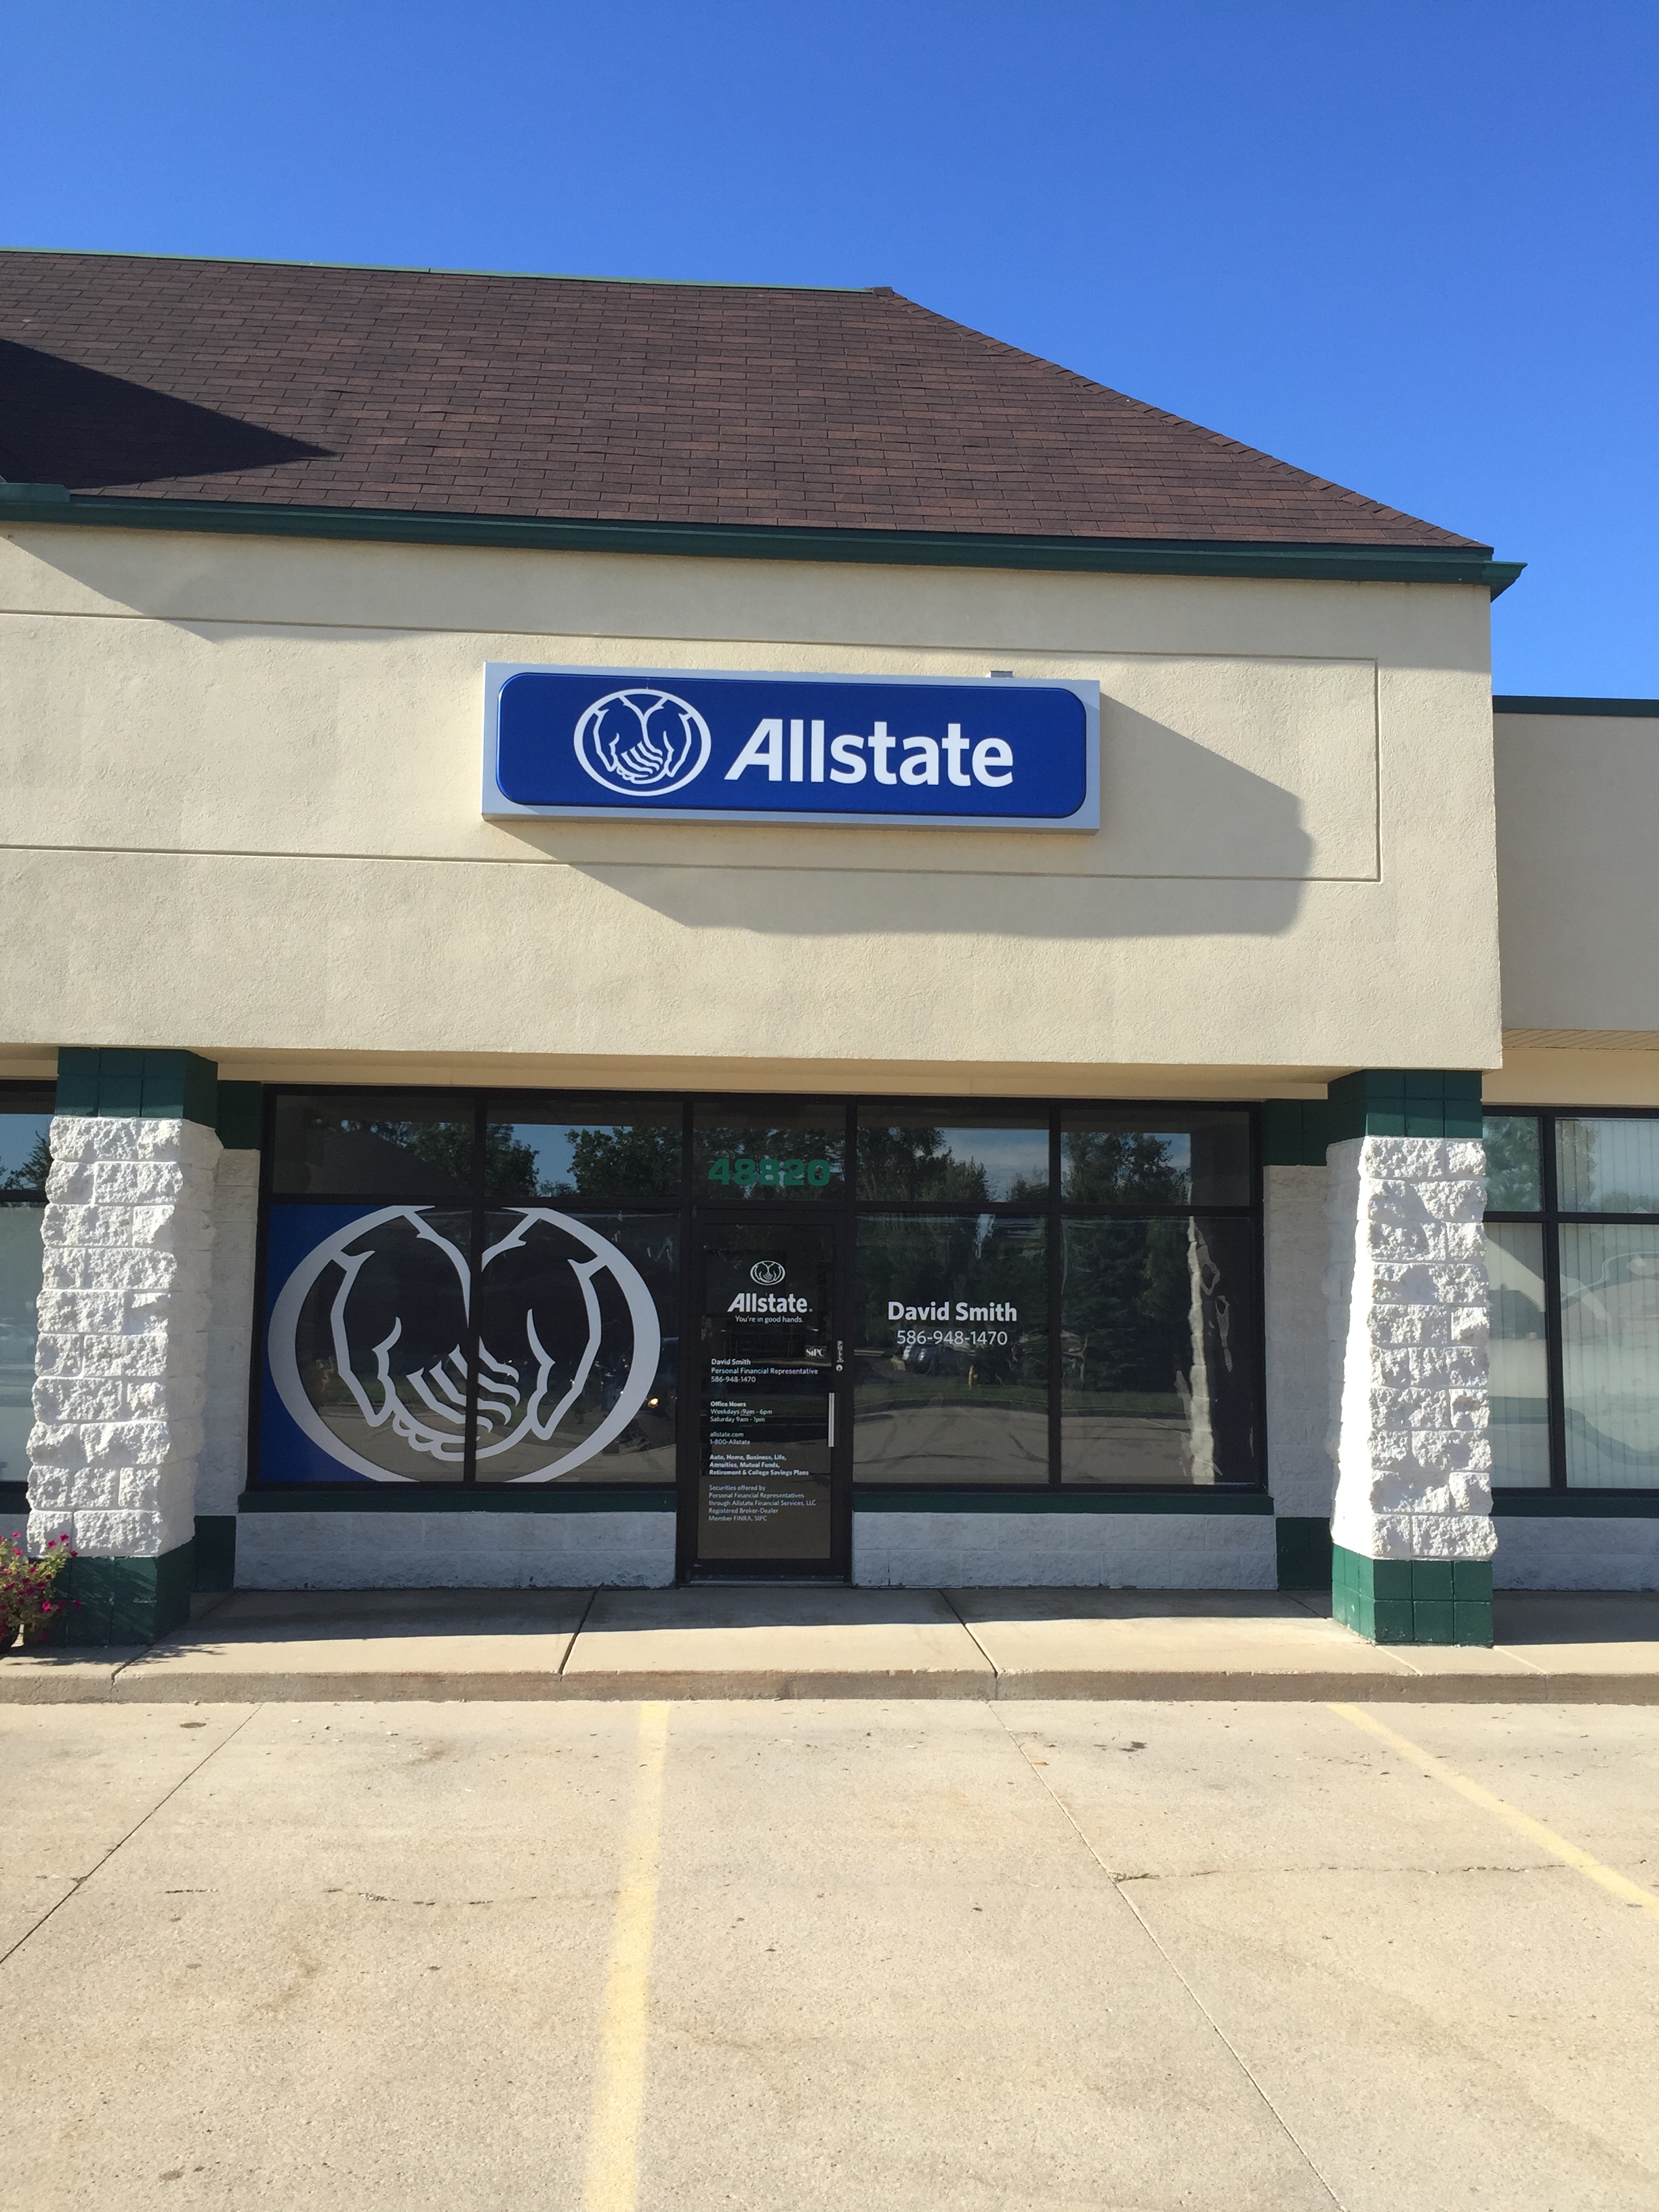 David Smith: Allstate Insurance Coupons near me in Chesterfield, MI 48051 | 8coupons